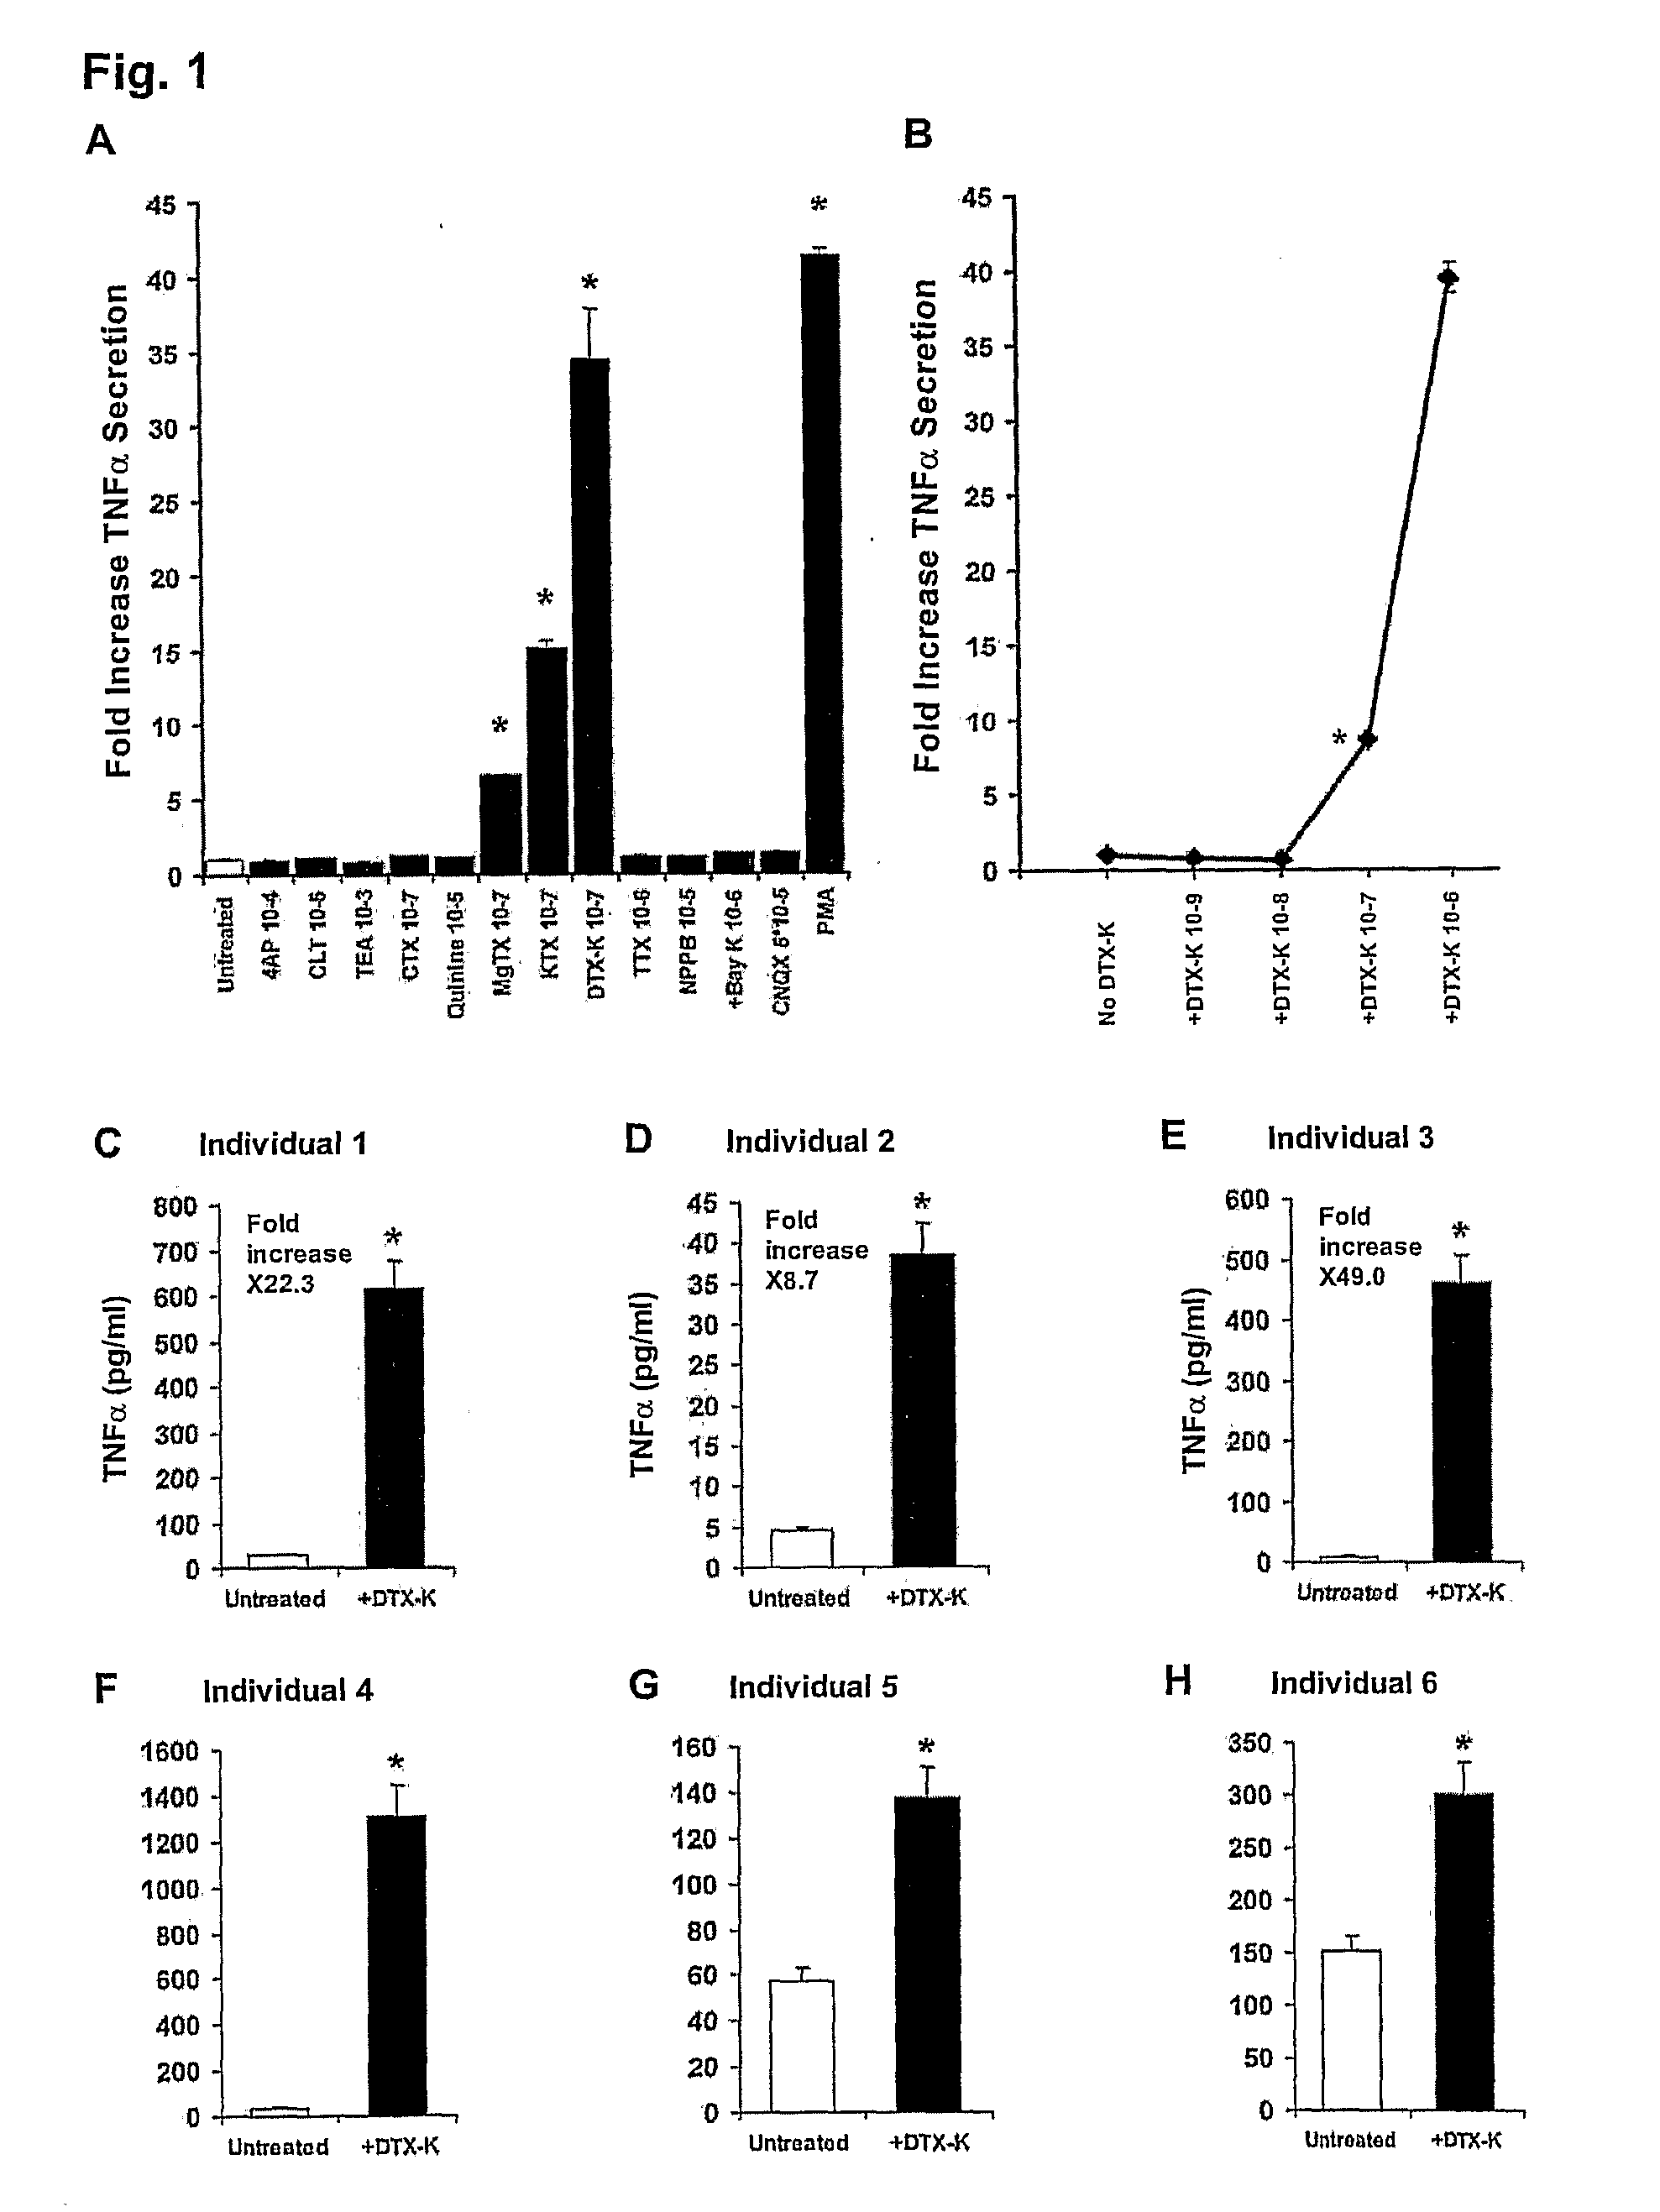 MODULATING THE KV1.1 VOLTAGE-GATED POTASSIUM CHANNEL IN T-CELLS FOR REGULATING THE SYNTHESIS AND SECRETION OF TUMOR NECROSIS FACTOR ALPHA (tnf-ALPHA) AND TREATING HUMAN DISEASE OR INJURIES MEDIATED BY DETRIMENTALLY HIGH OR LOW LEVELS OF TNF-ALPHA